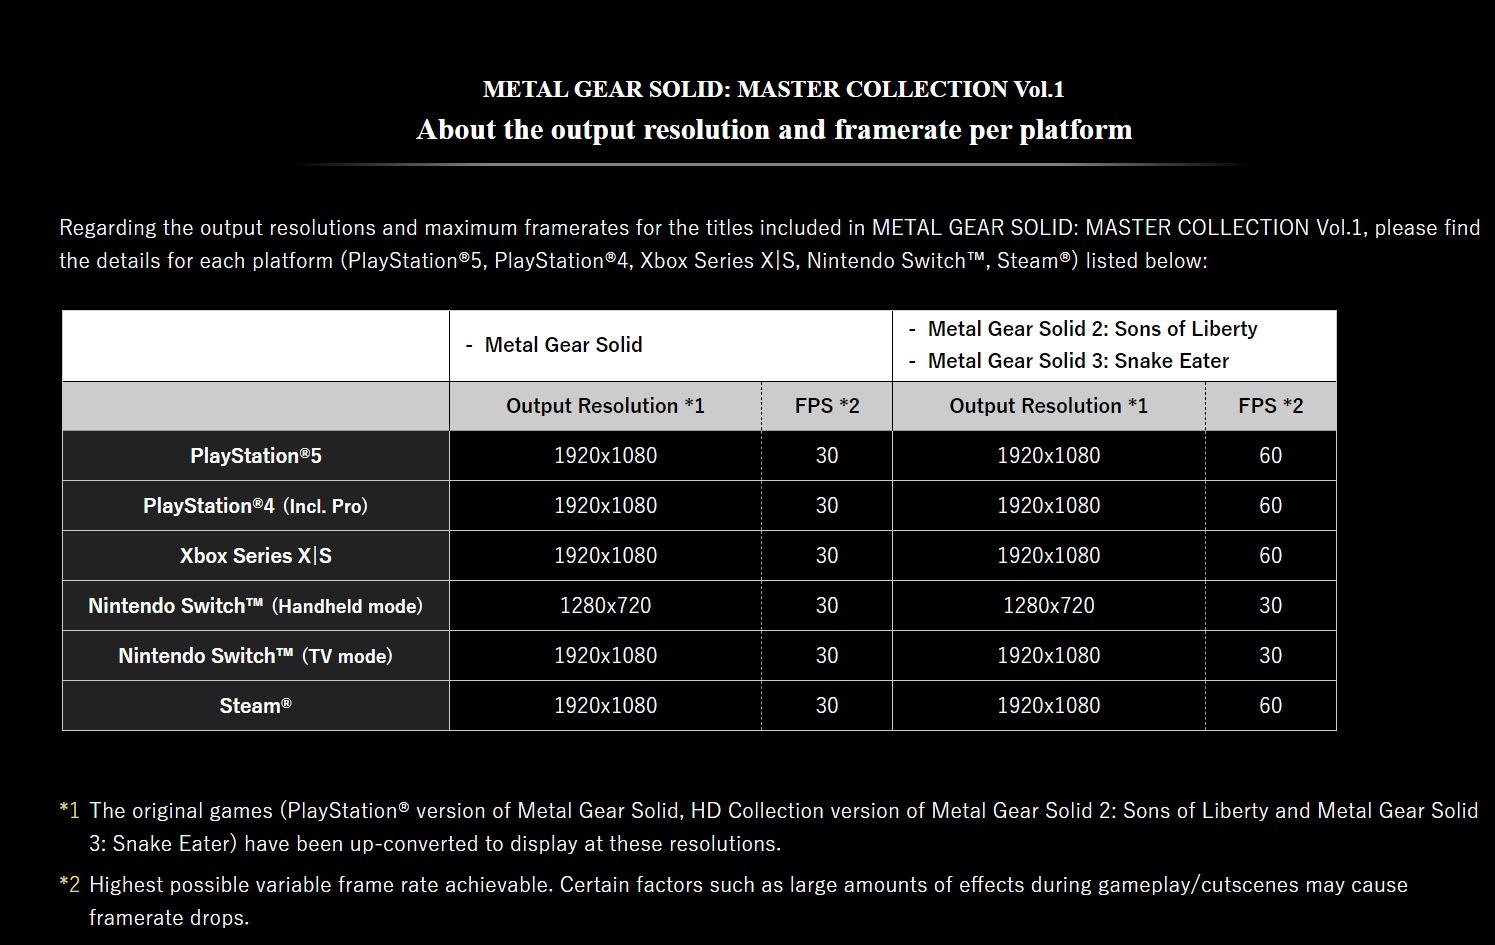 metal gear solid master collection vol.1 resolutions framerates jeux